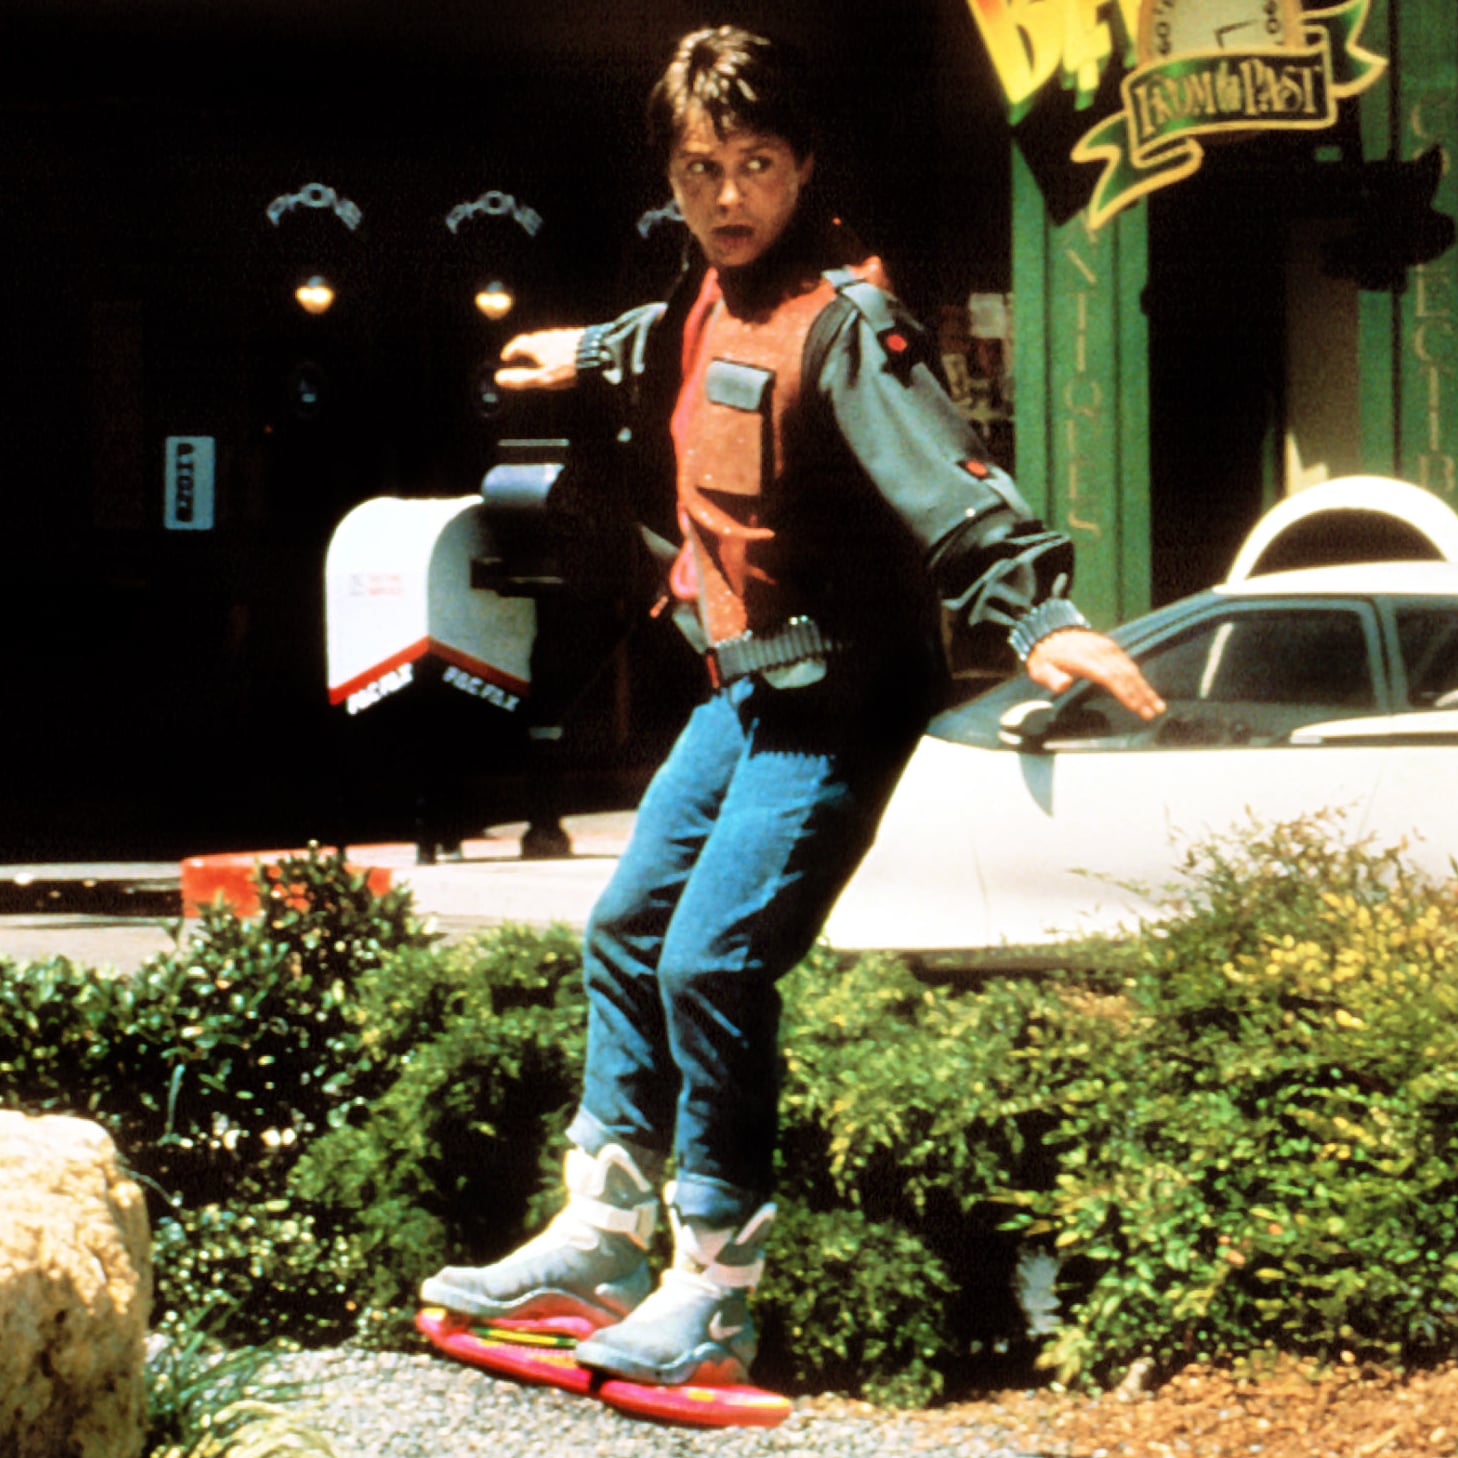 back to the future trainers